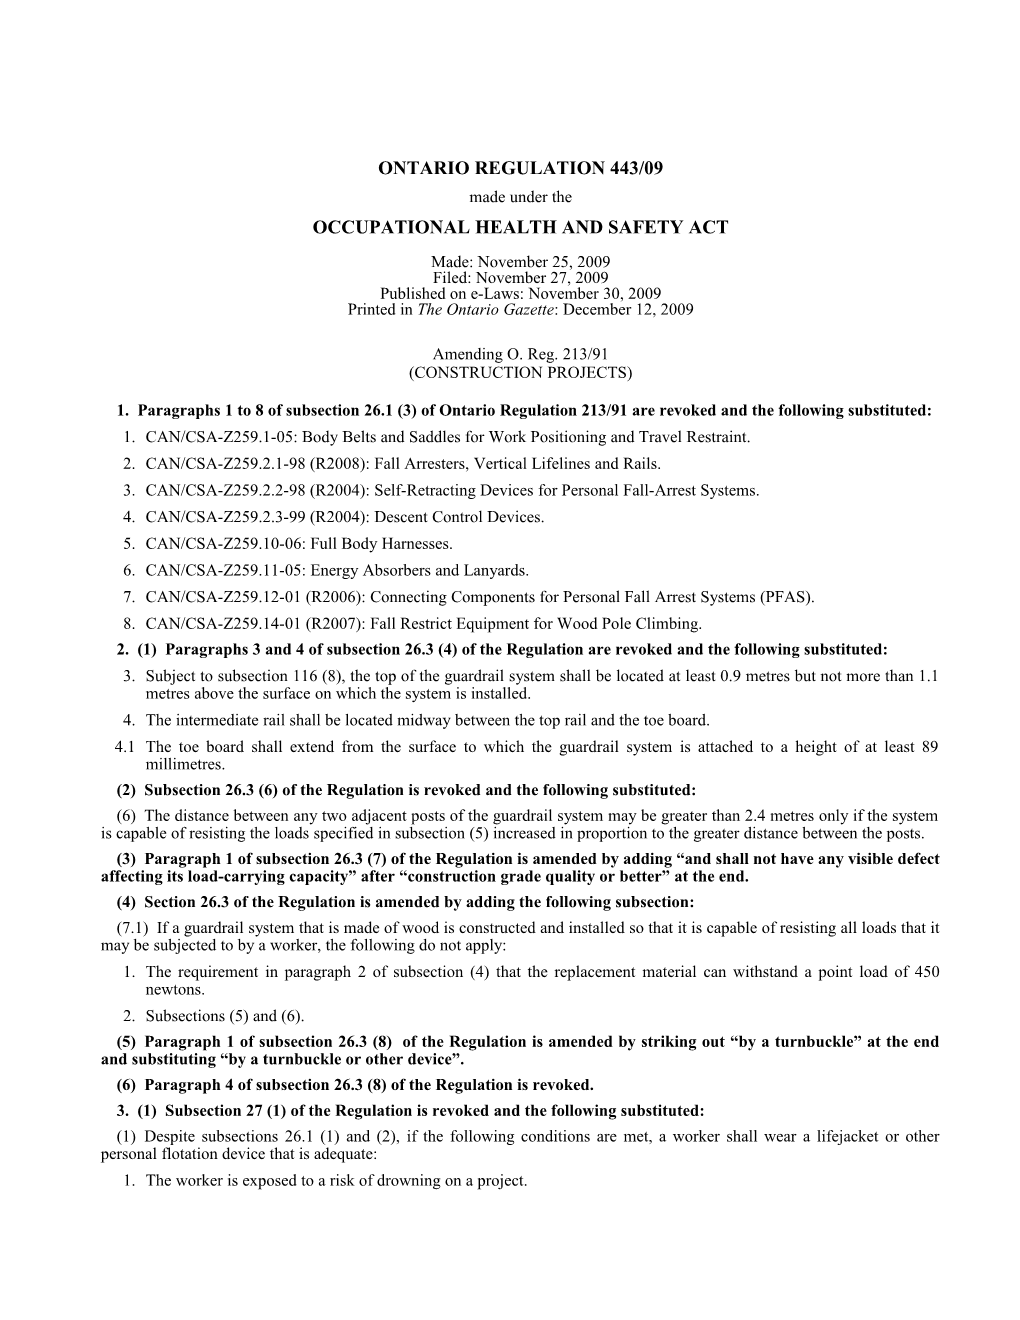 OCCUPATIONAL HEALTH and SAFETY ACT - O. Reg. 443/09